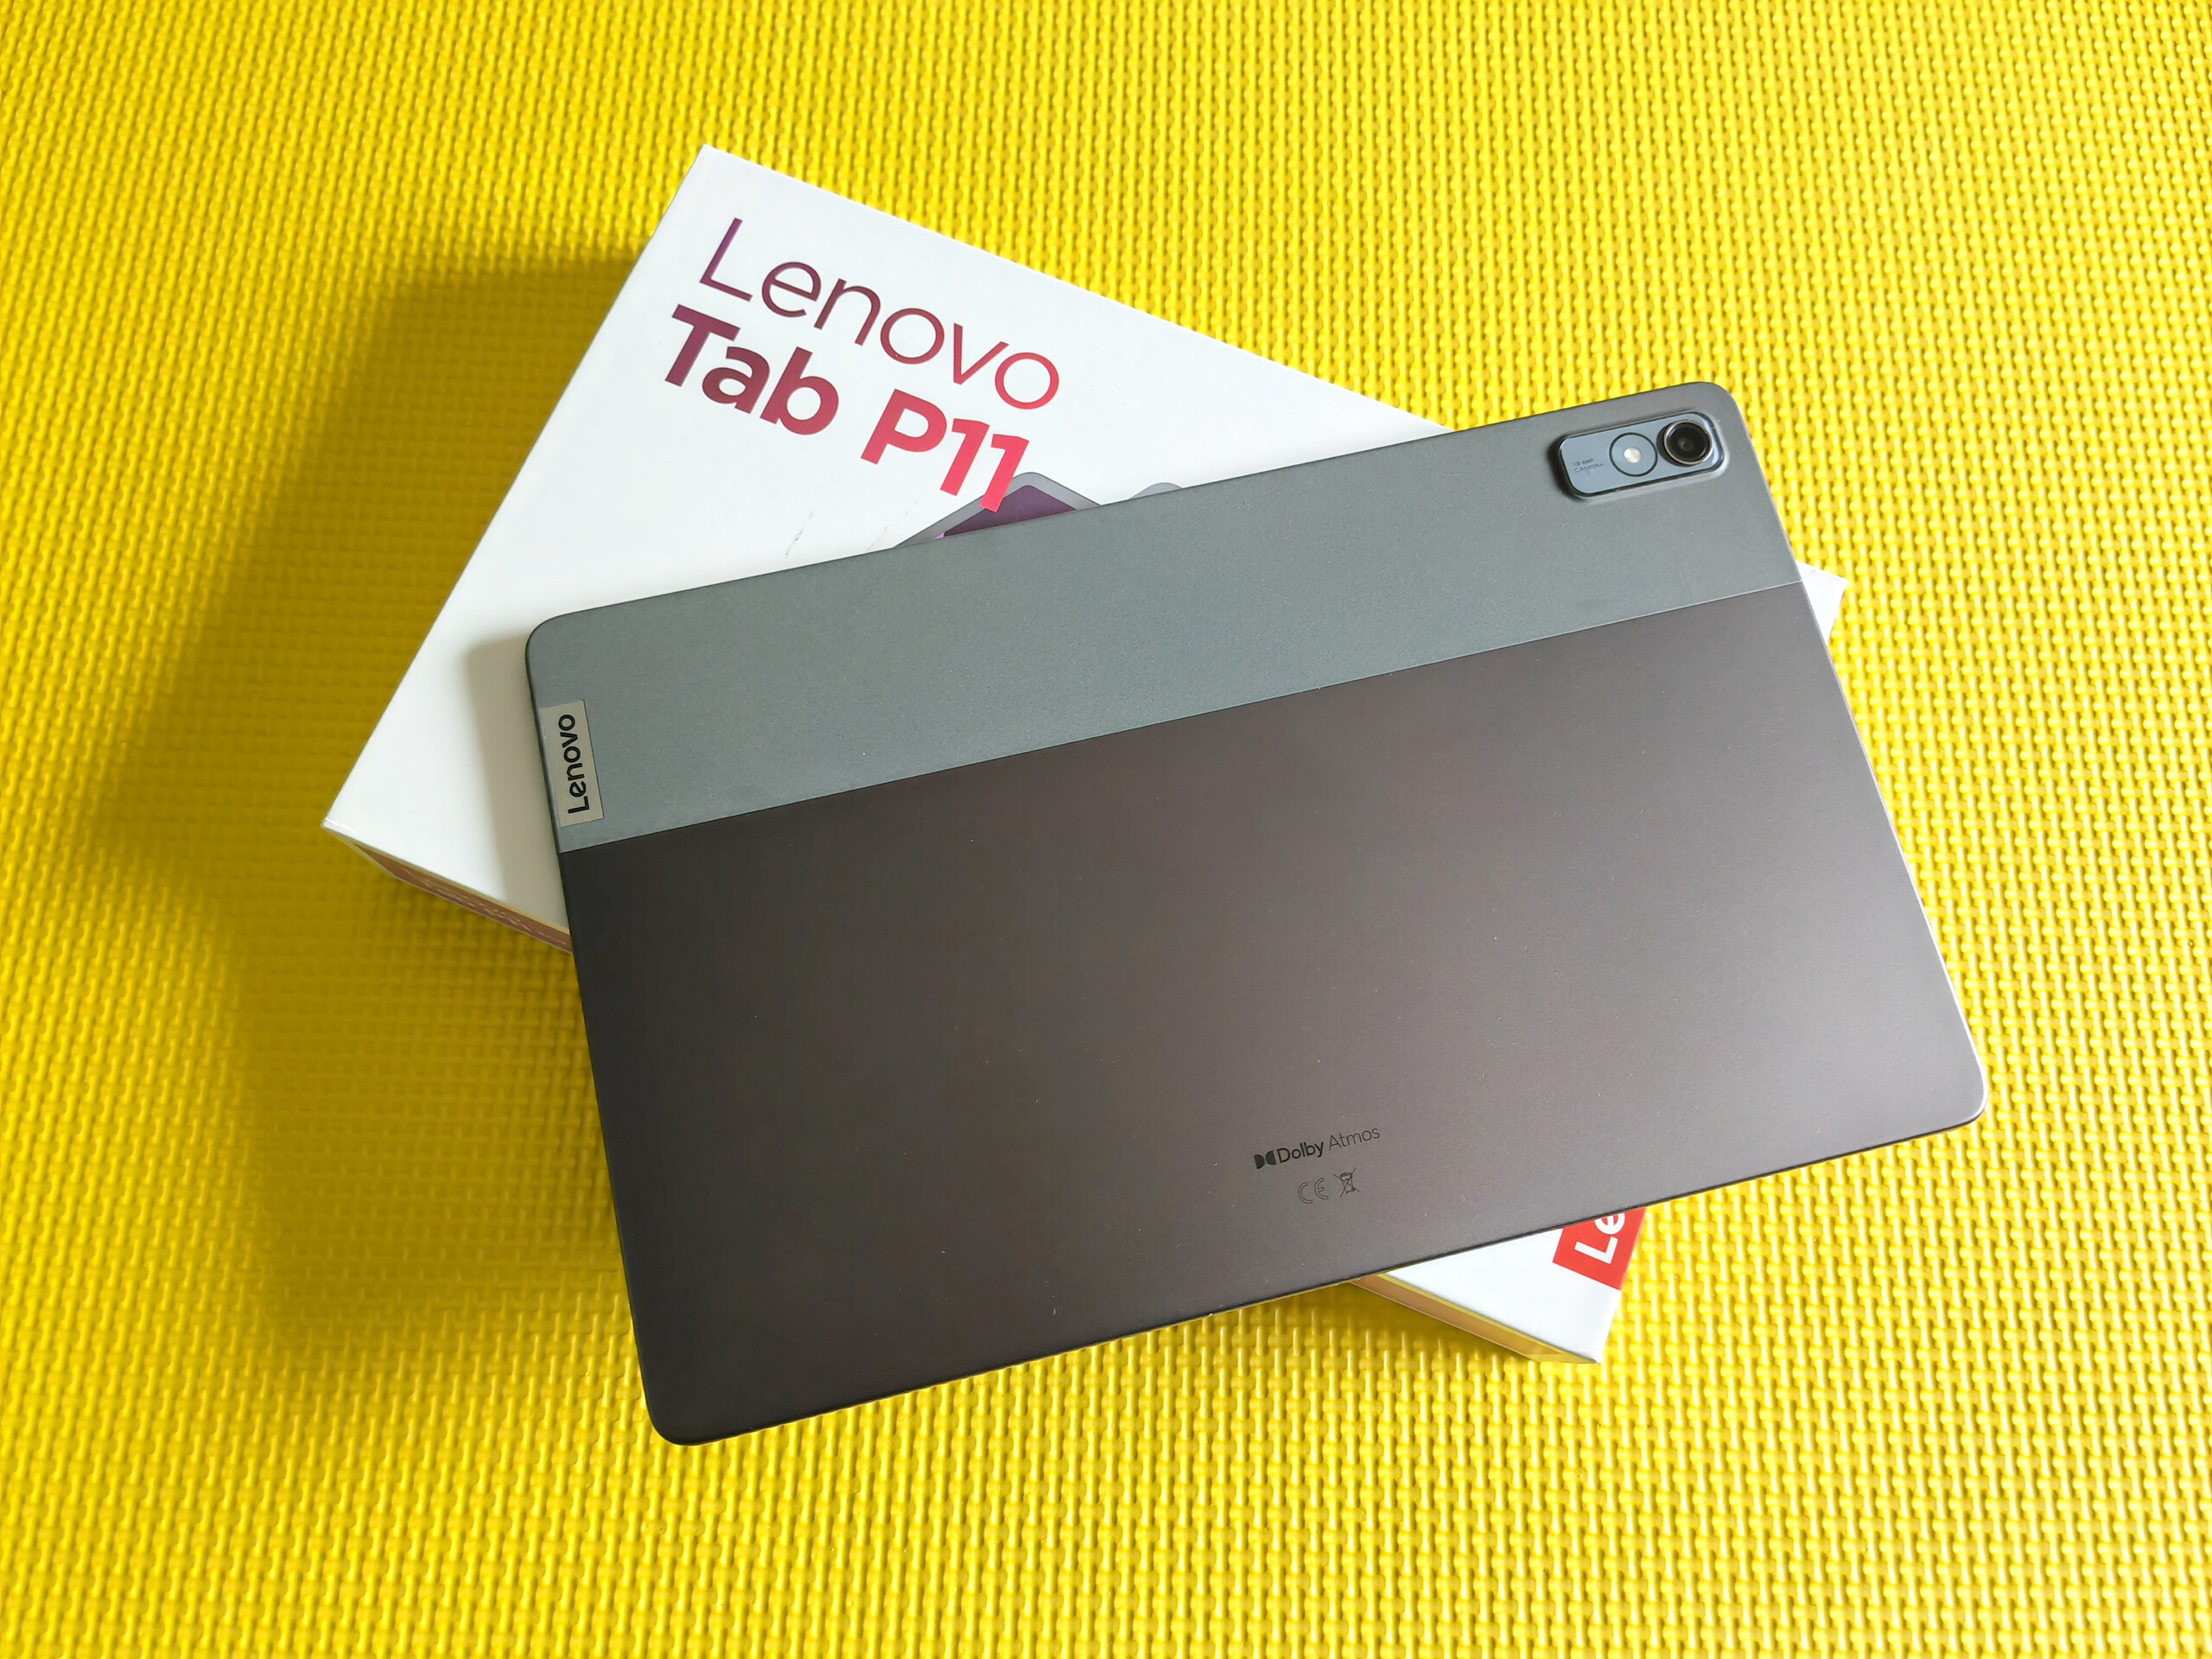 Lenovo Tab P11 Plus Tablet Review - Consumer Reports